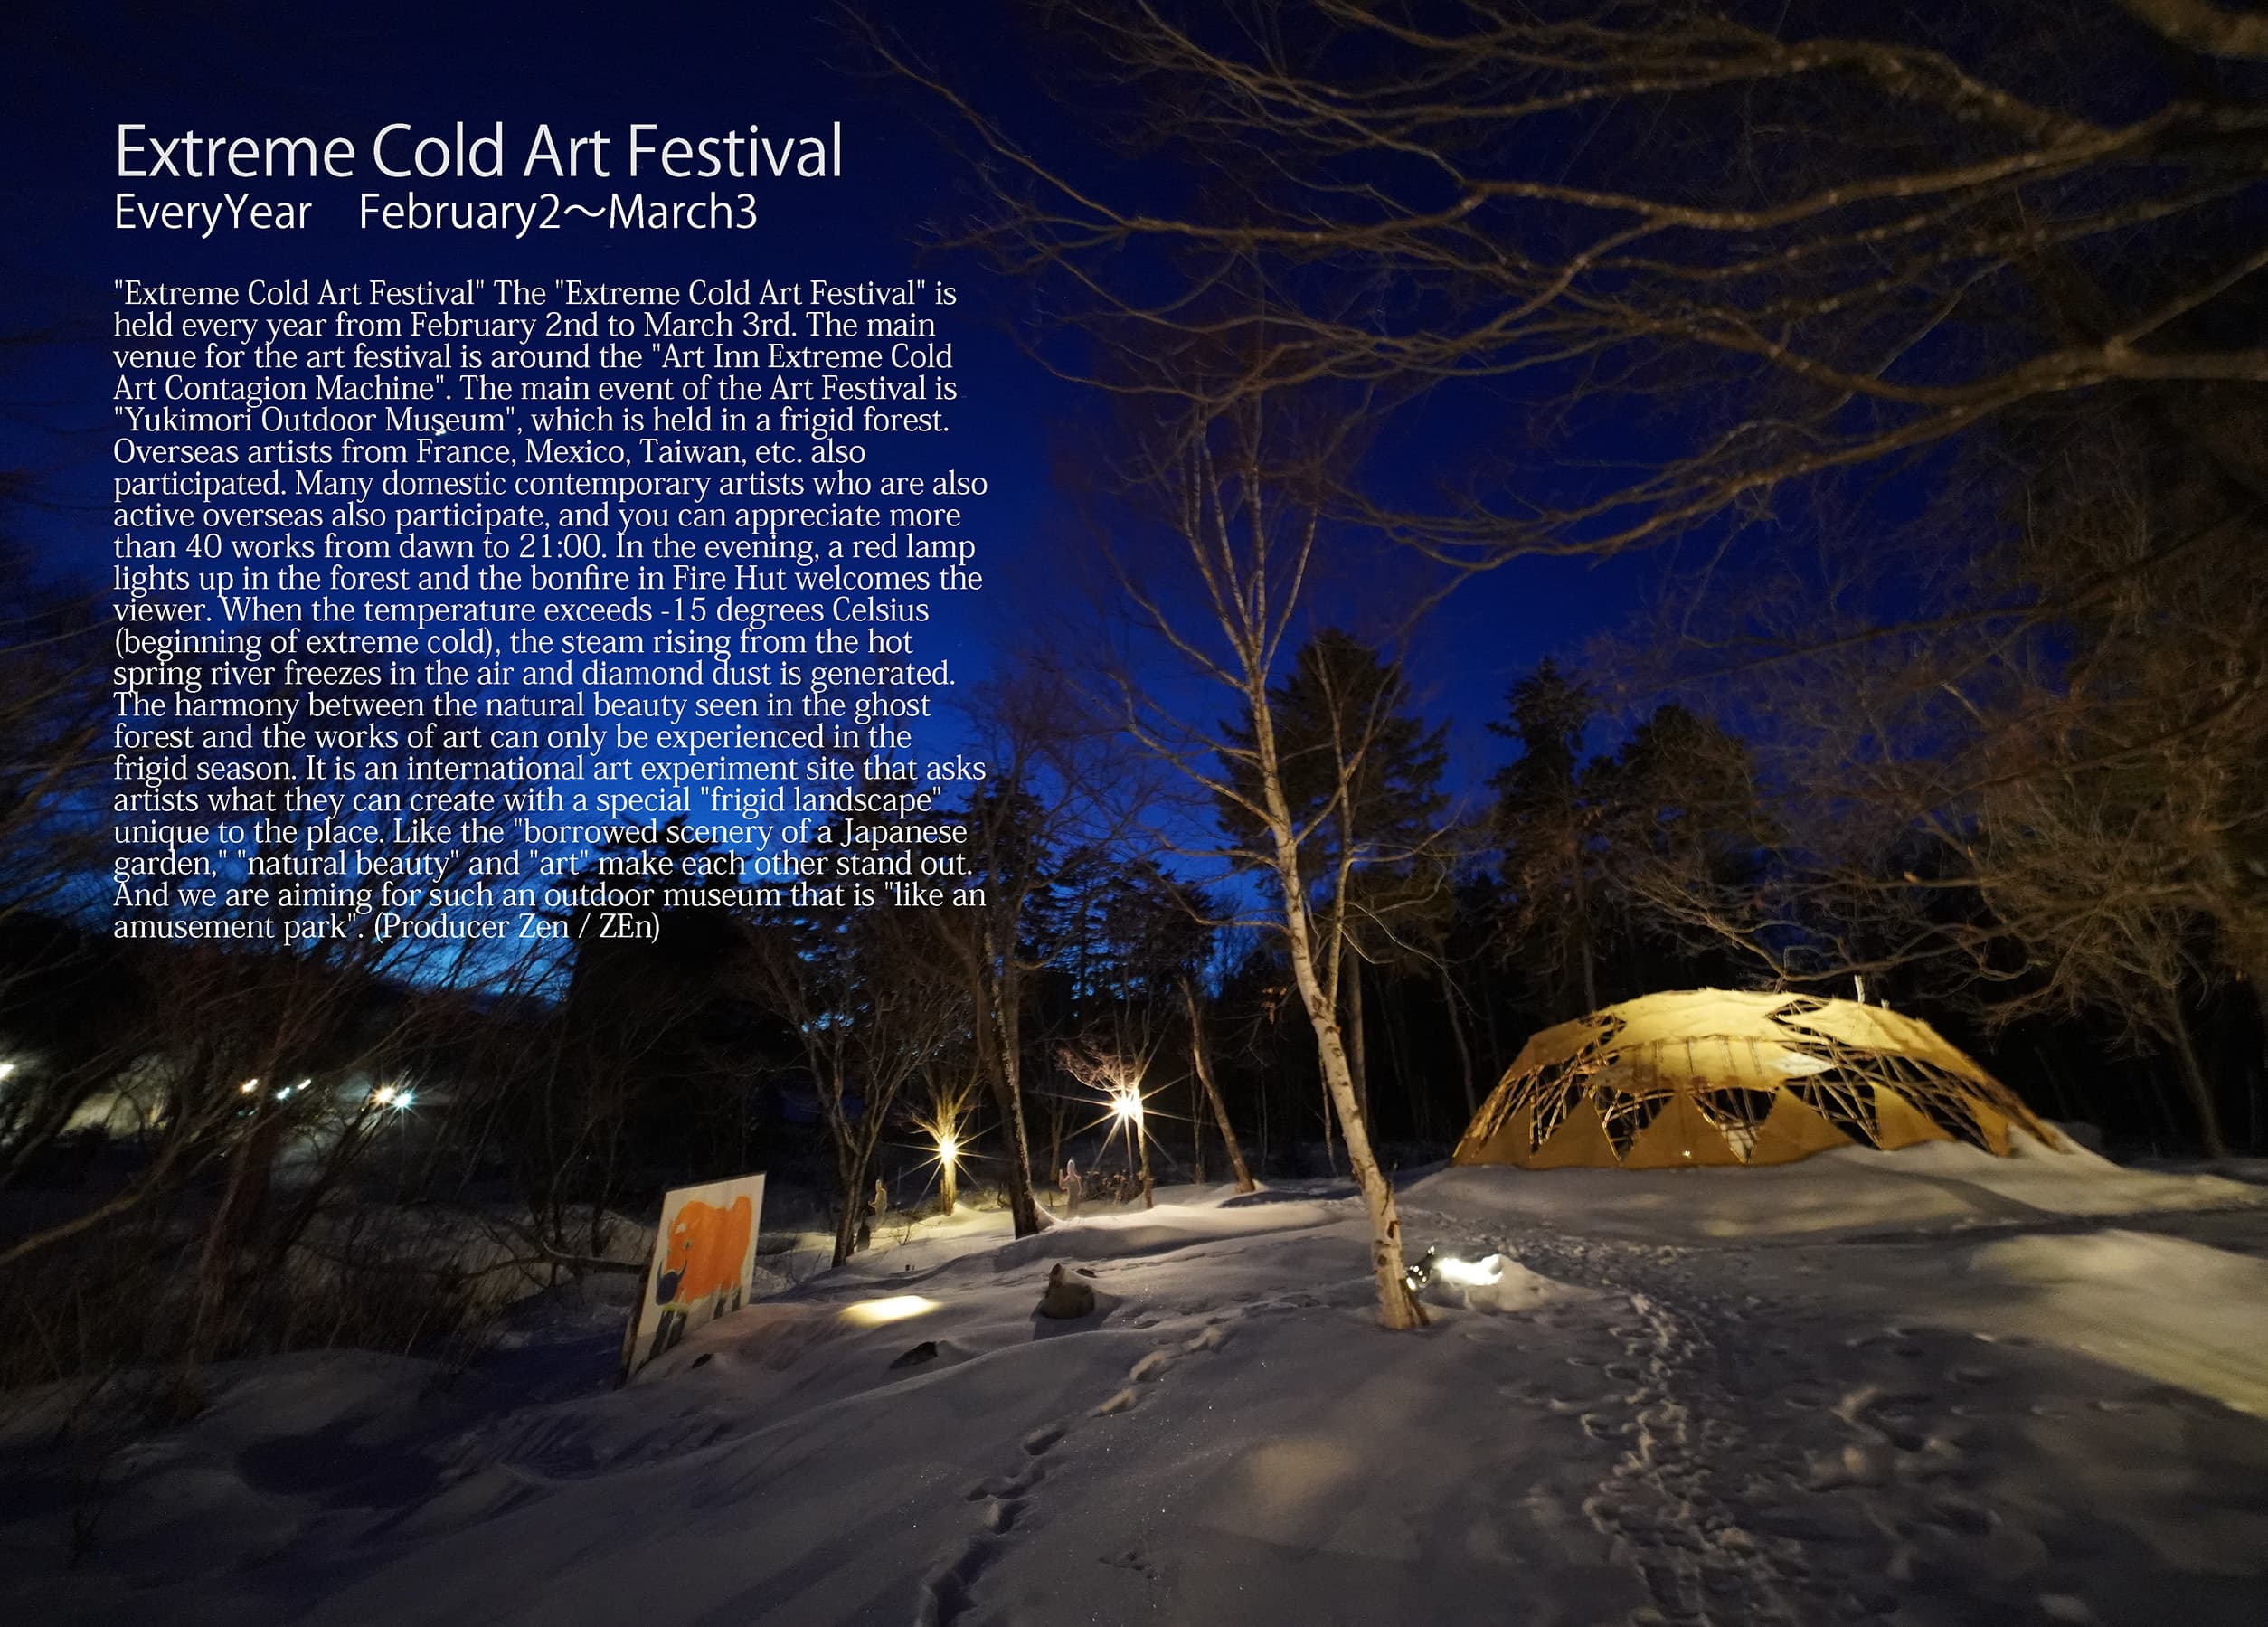 Extreme Cold Art Festival EveryYear　February2～March3 "Extreme Cold Art Festival" The "Extreme Cold Art Festival" is held every year from February 2nd to March 3rd. The main venue for the art festival is around the "Art Inn Extreme Cold Art Contagion Machine". The main event of the Art Festival is "Yukimori Outdoor Museum", which is held in a frigid forest. Overseas artists from France, Mexico, Taiwan, etc. also participated. Many domestic contemporary artists who are also active overseas also participate, and you can appreciate more than 40 works from dawn to 21:00. In the evening, a red lamp lights up in the forest and the bonfire in Fire Hut welcomes the viewer. When the temperature exceeds -15 degrees Celsius (beginning of extreme cold), the steam rising from the hot spring river freezes in the air and diamond dust is generated. The harmony between the natural beauty seen in the ghost forest and the works of art can only be experienced in the frigid season. It is an international art experiment site that asks artists what they can create with a special "frigid landscape" unique to the place. Like the "borrowed scenery of a Japanese garden," "natural beauty" and "art" make each other stand out. And we are aiming for such an outdoor museum that is "like an amusement park". (Producer Zen / ZEn)